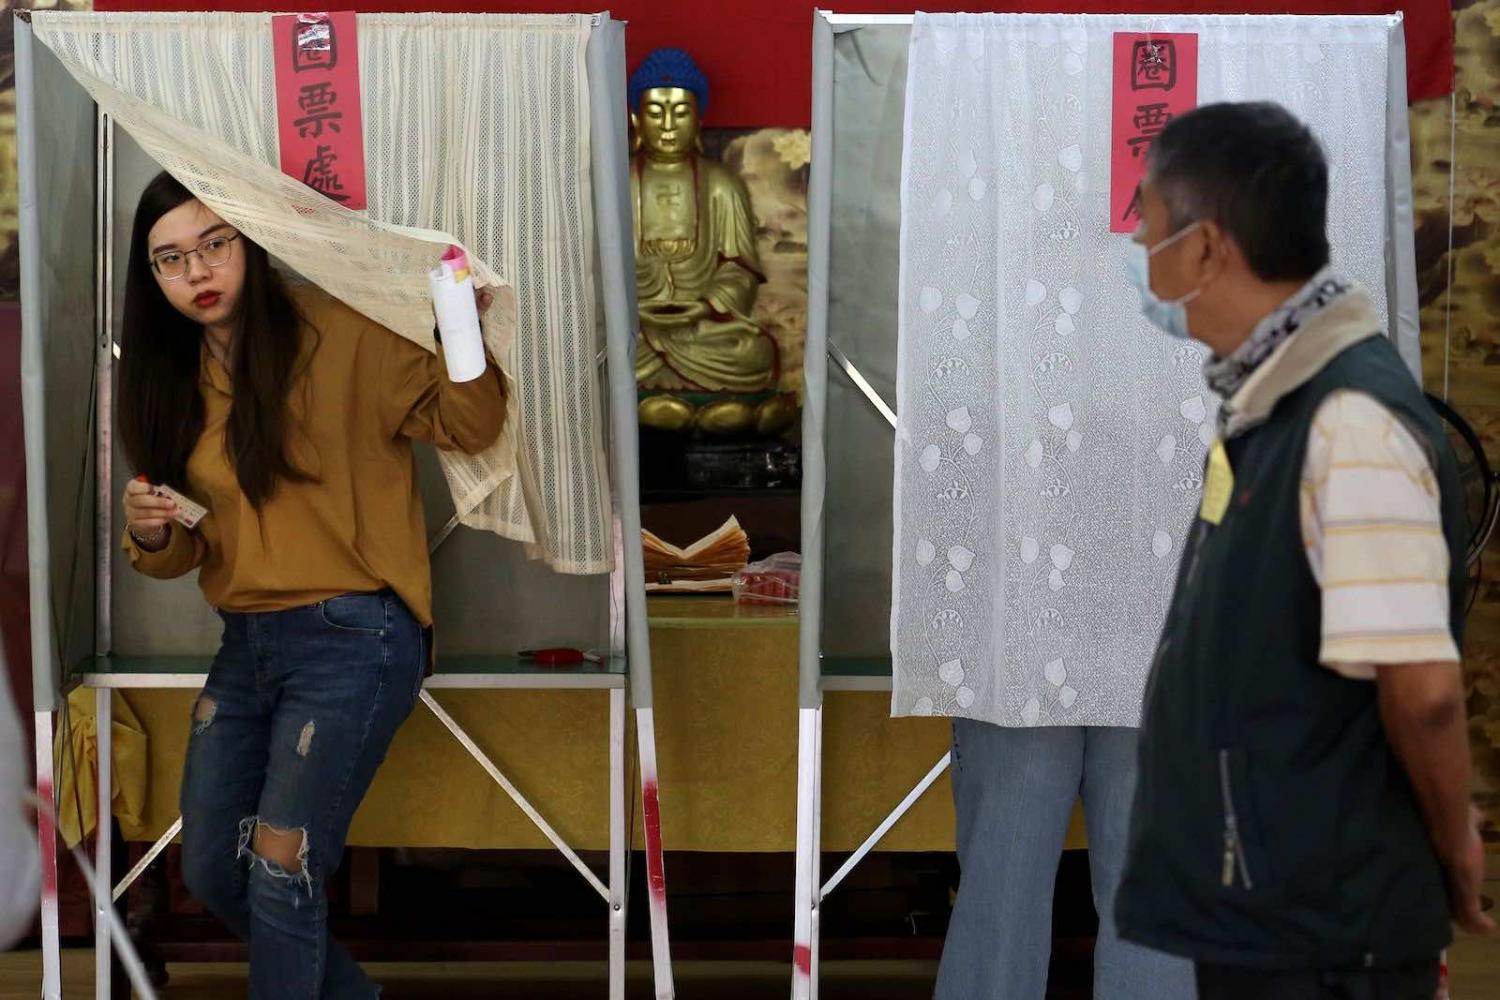 A polling station at Linyuan District in Kaohsiung during the January 2020 elections in Taiwan (Hsu Tsun-hsu/AFP via Getty Images)